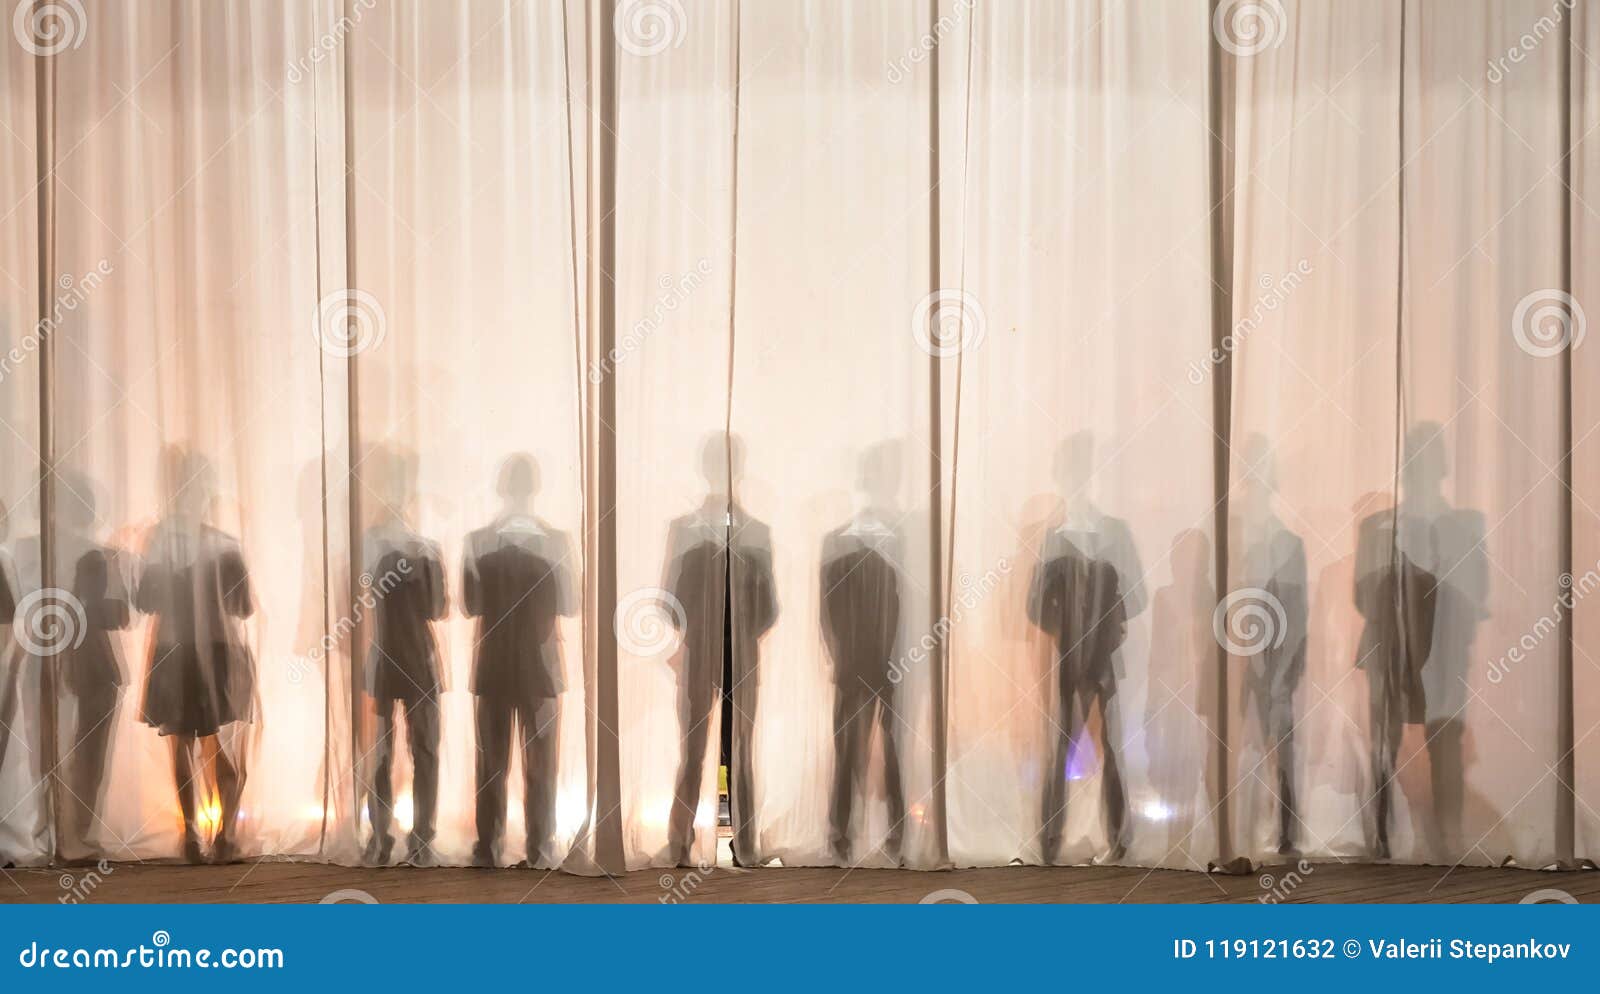 the silhouette of the men behind the curtain in the theater on stage, the shadow behind the scenes is similar to the white and bla